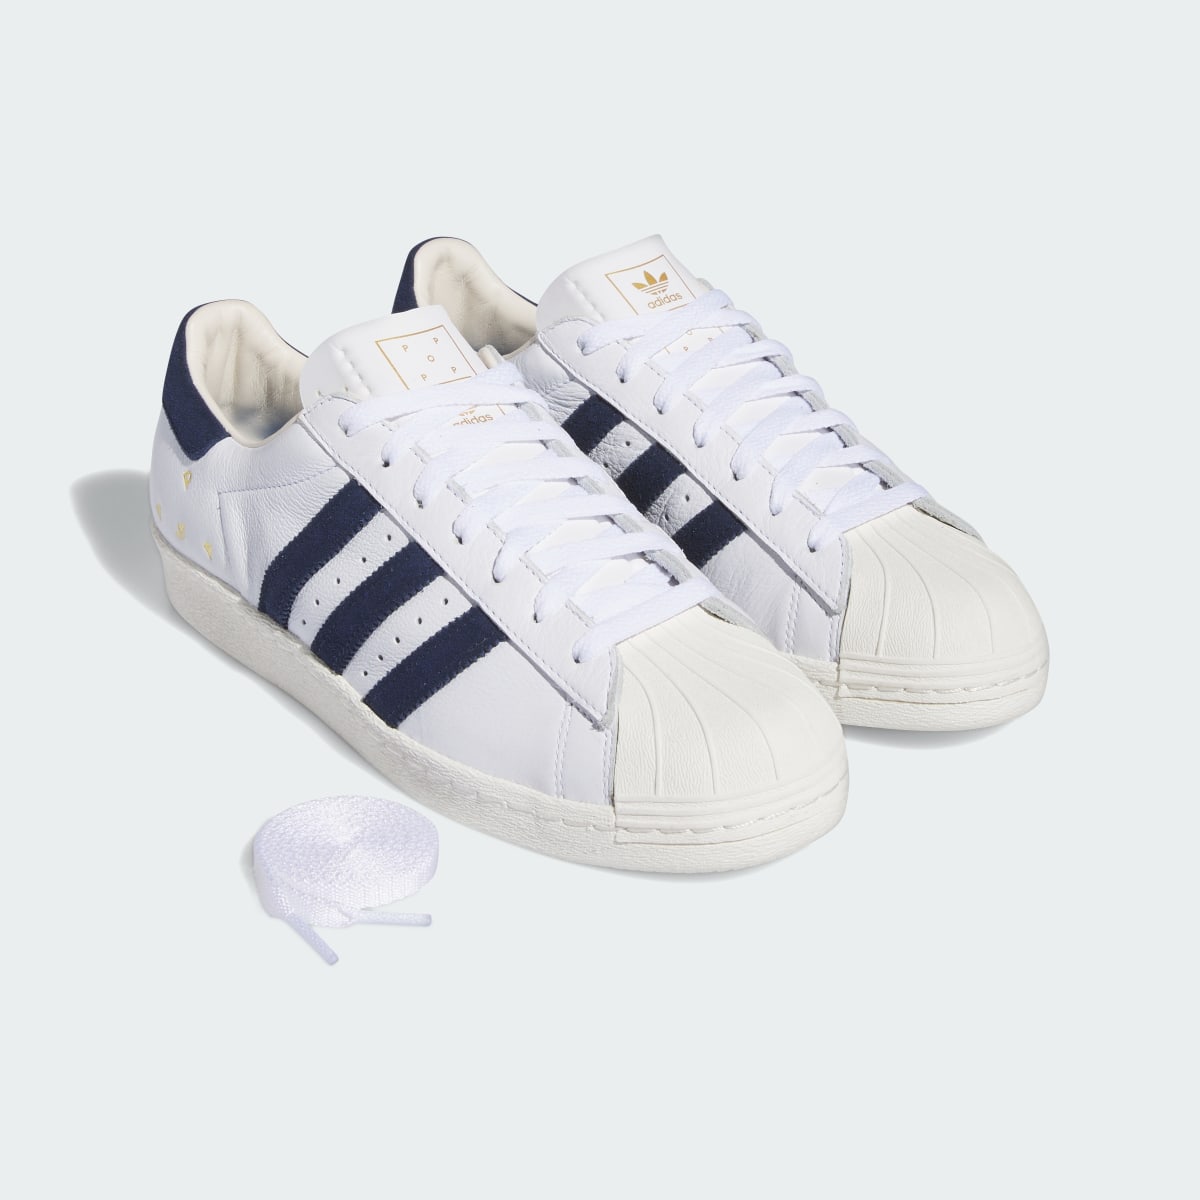 Adidas Pop Trading Co Superstar ADV Trainers. 10